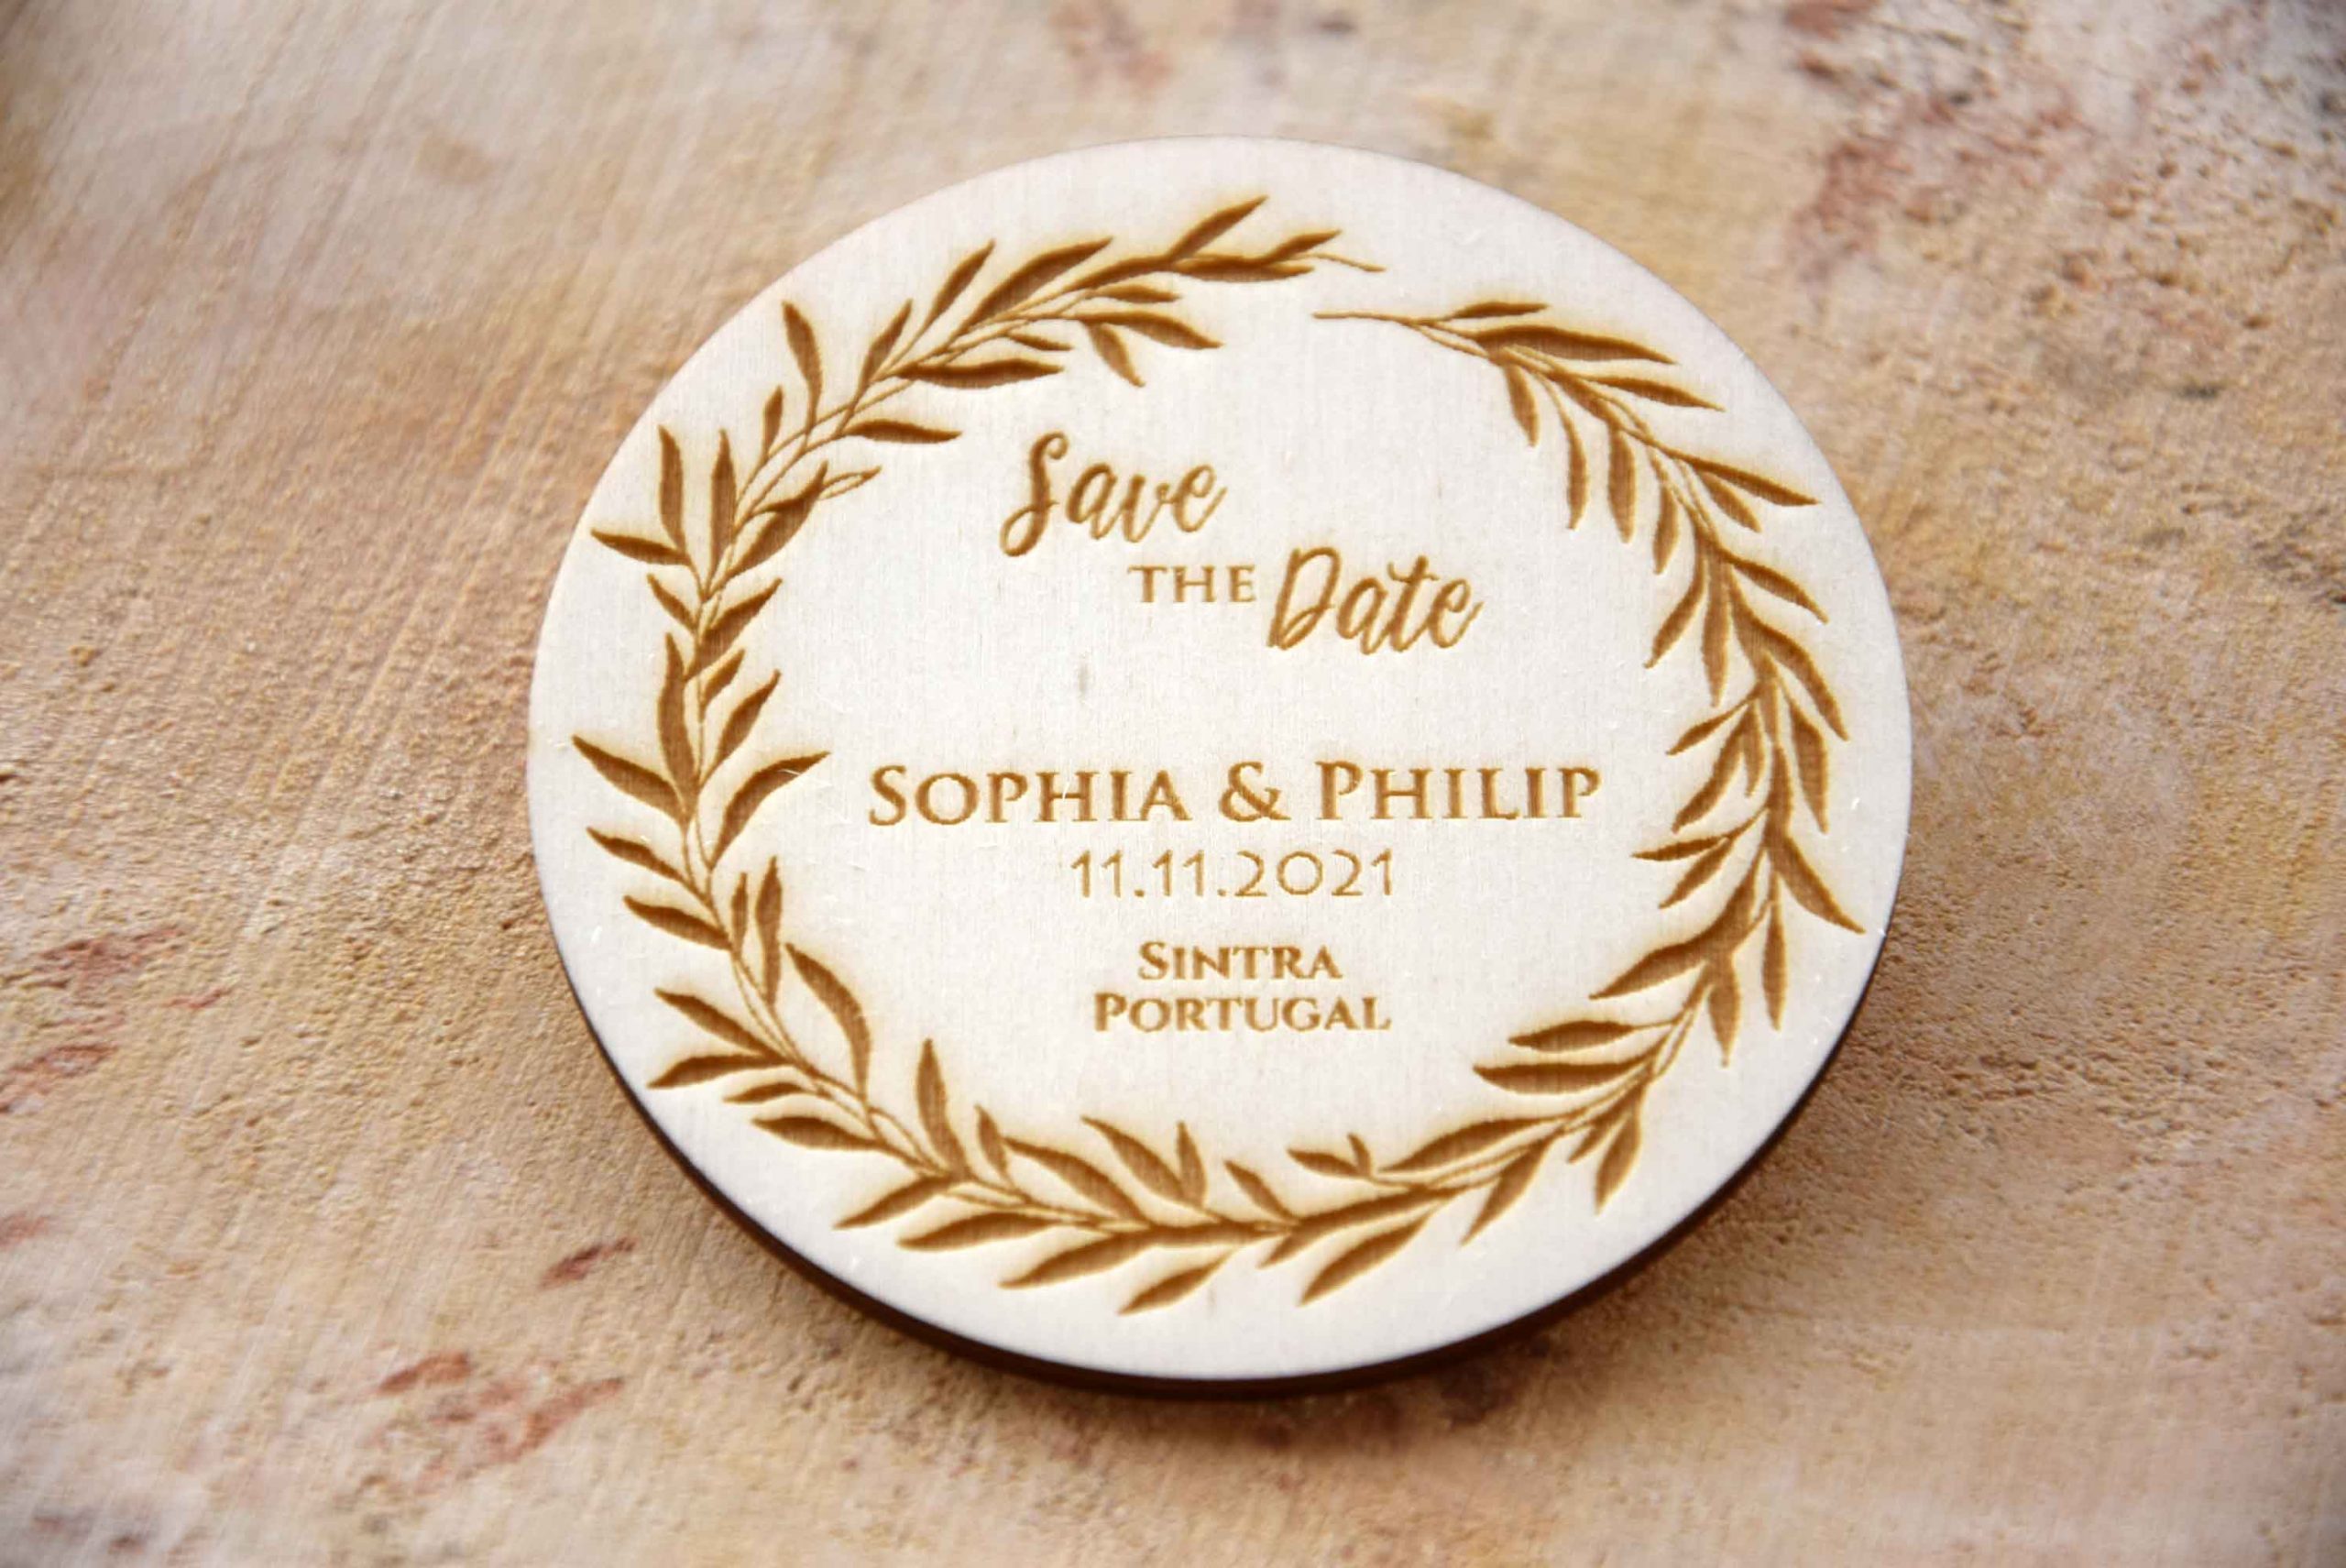  Save the date magnets, whiskey themed wedding save the dates,  wooden magnets, wedding magnets, rustic save the dates, set of 25 :  Handmade Products